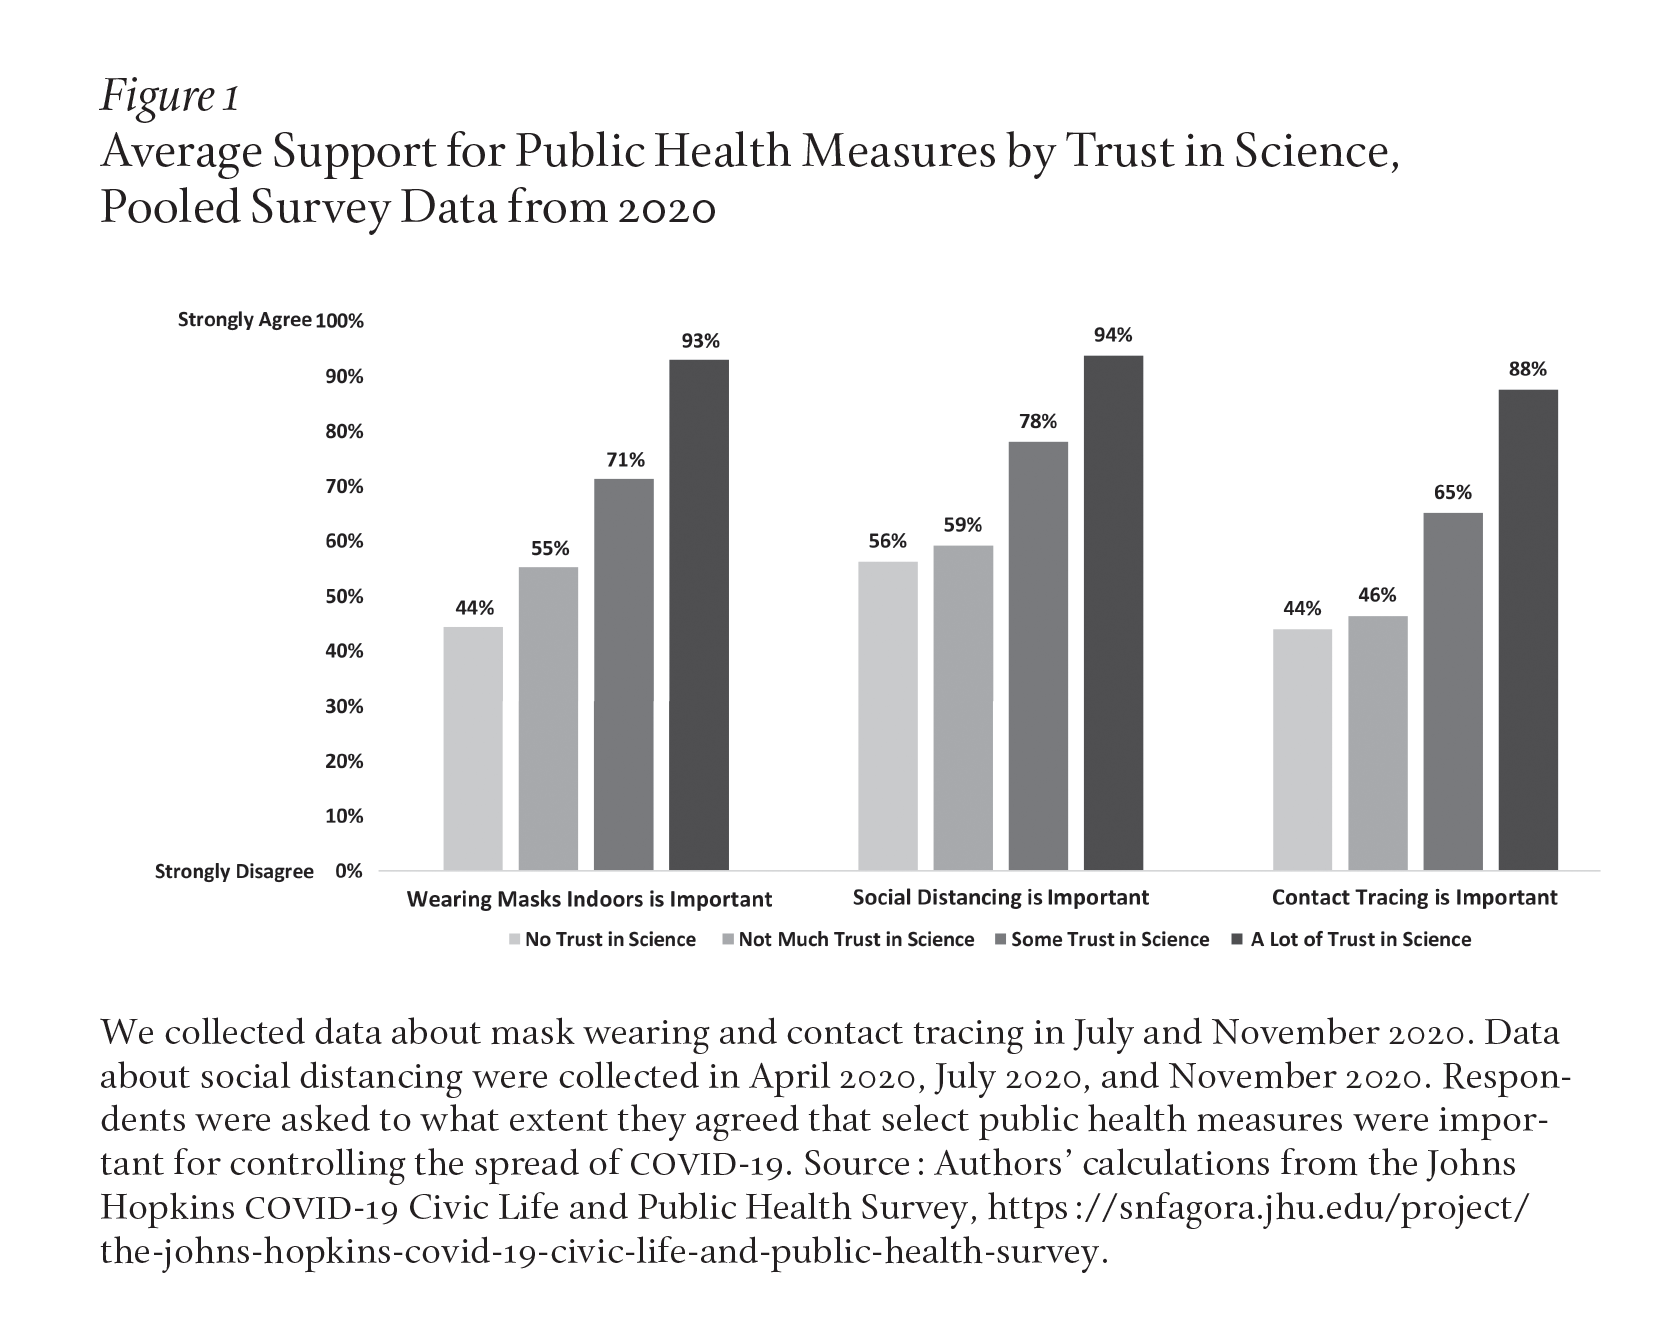 Image description: A bar chart compares the rates of public support for wearing masks, social distancing, and contact tracing. Respondents who reported "A lot of trust in science" were 40-50% more supportive, on average, of each public health measure. Caption: Respondents were asked to what extent they agreed that select public health measures were important for controlling the spread of COVID-19. Source: Authors’ calculations from the Johns Hopkins COVID-19 Civic Life and Public Health Survey.